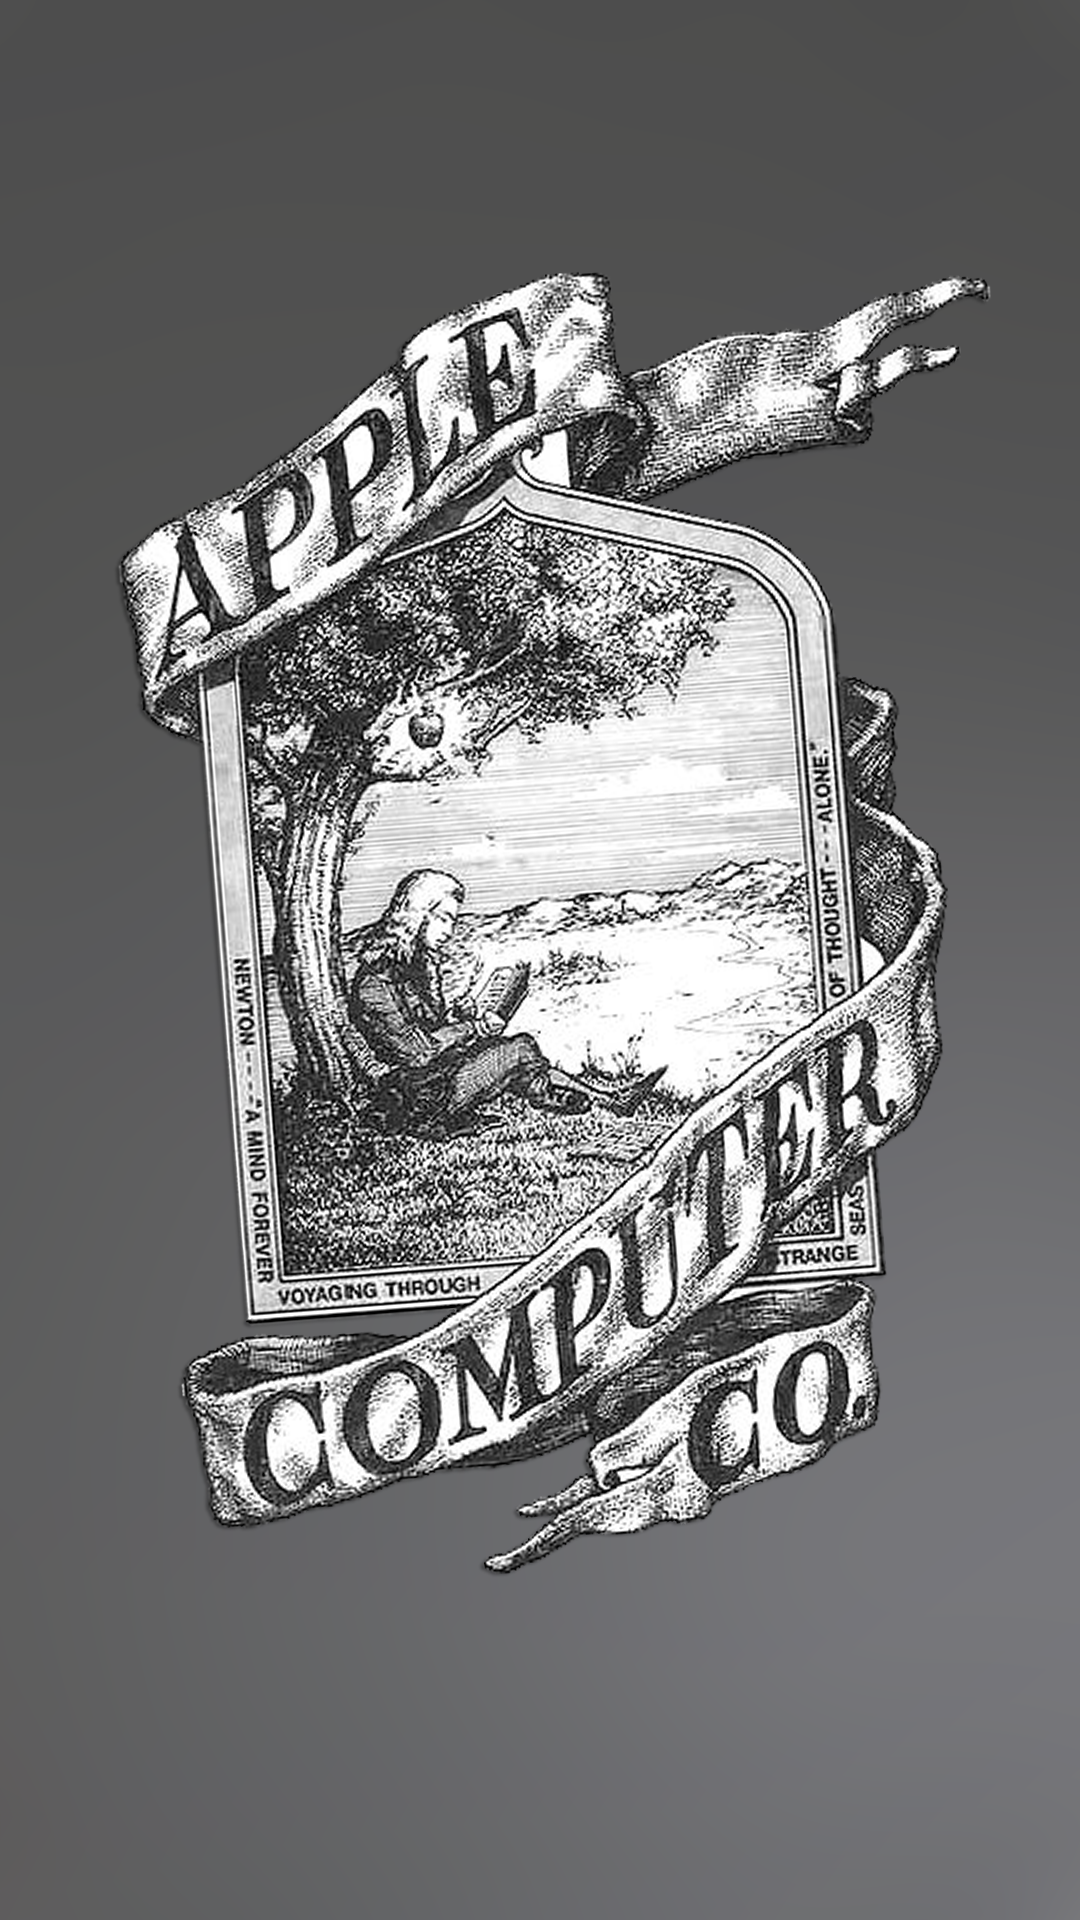 old apple wallpapers,illustration,font,logo,fashion accessory,graphics